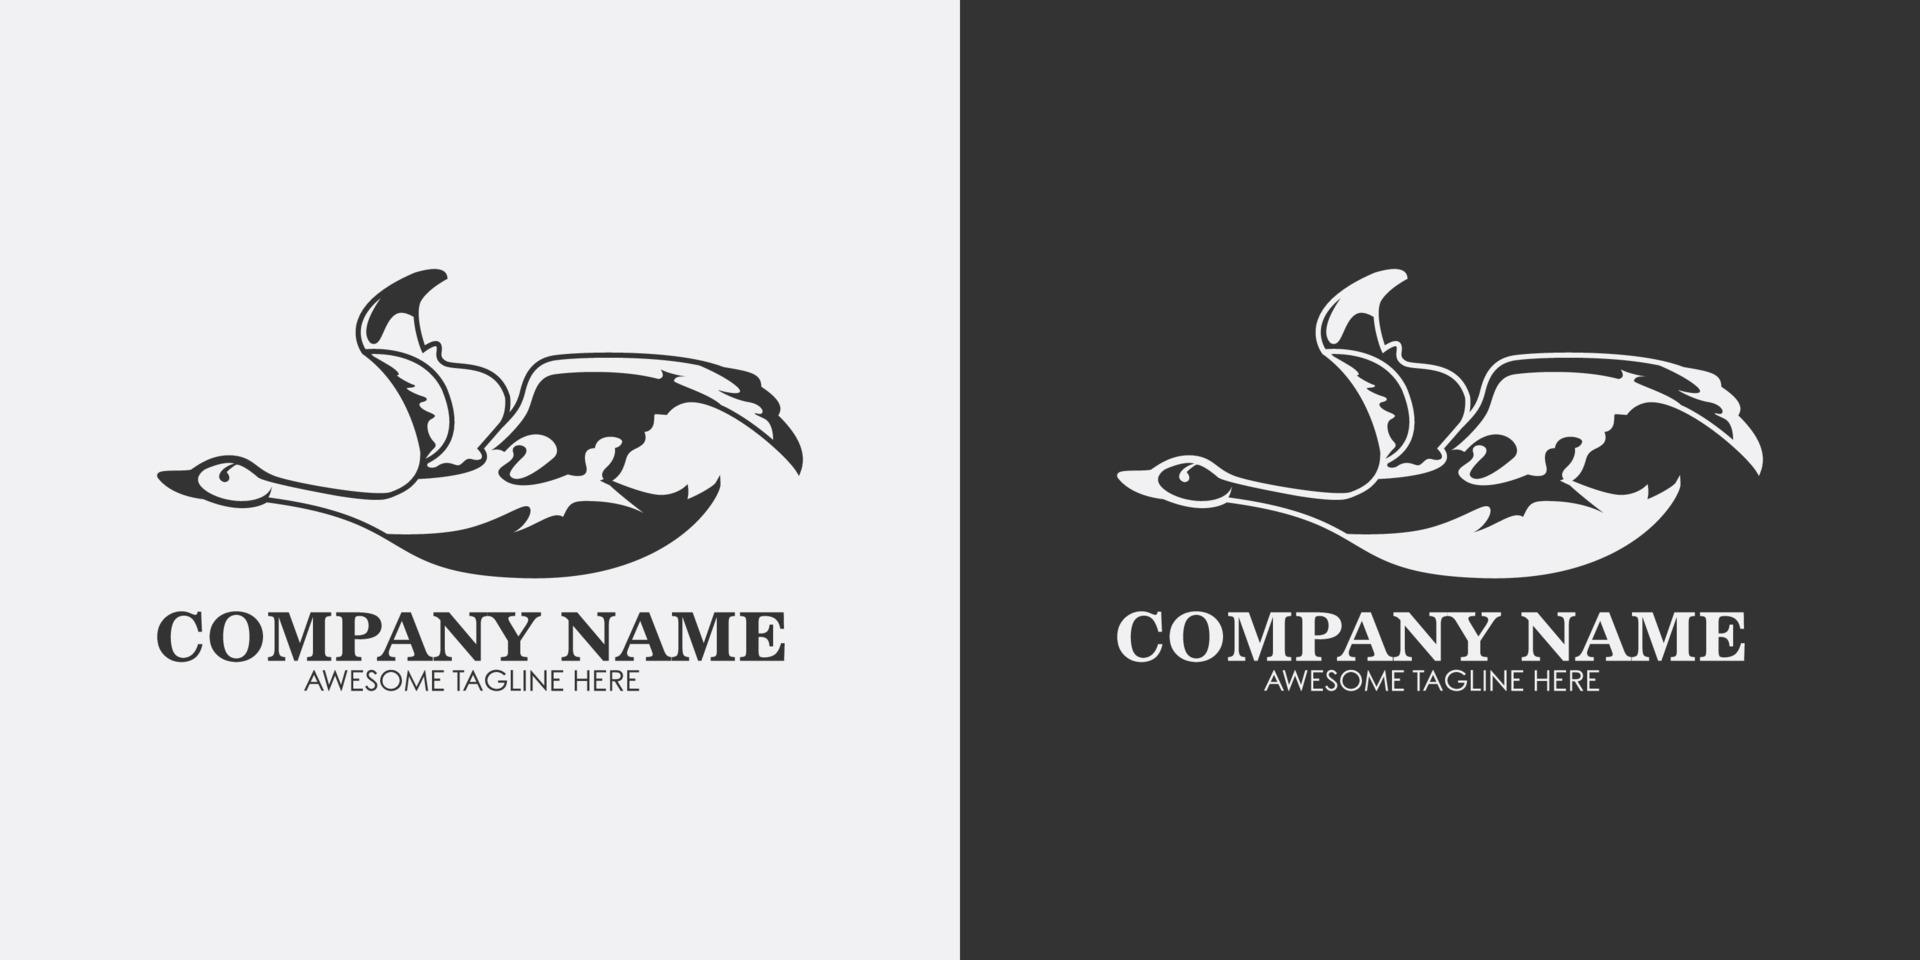 Swan logo design concept template with black and white color variant design 03 vector